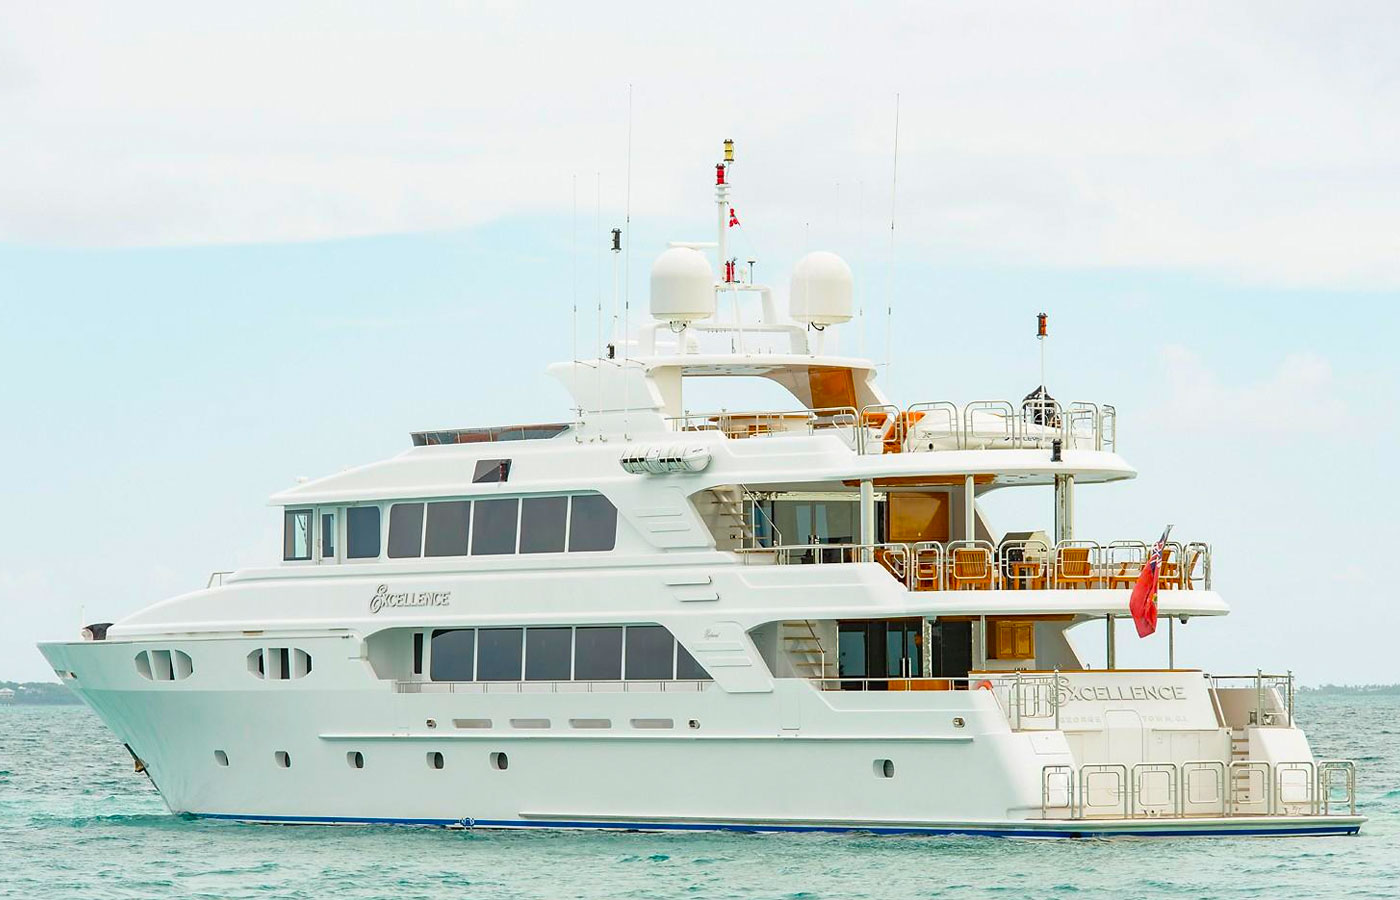 Top Charter Yachts At FLIBS 2019 [Boat Show Guide]